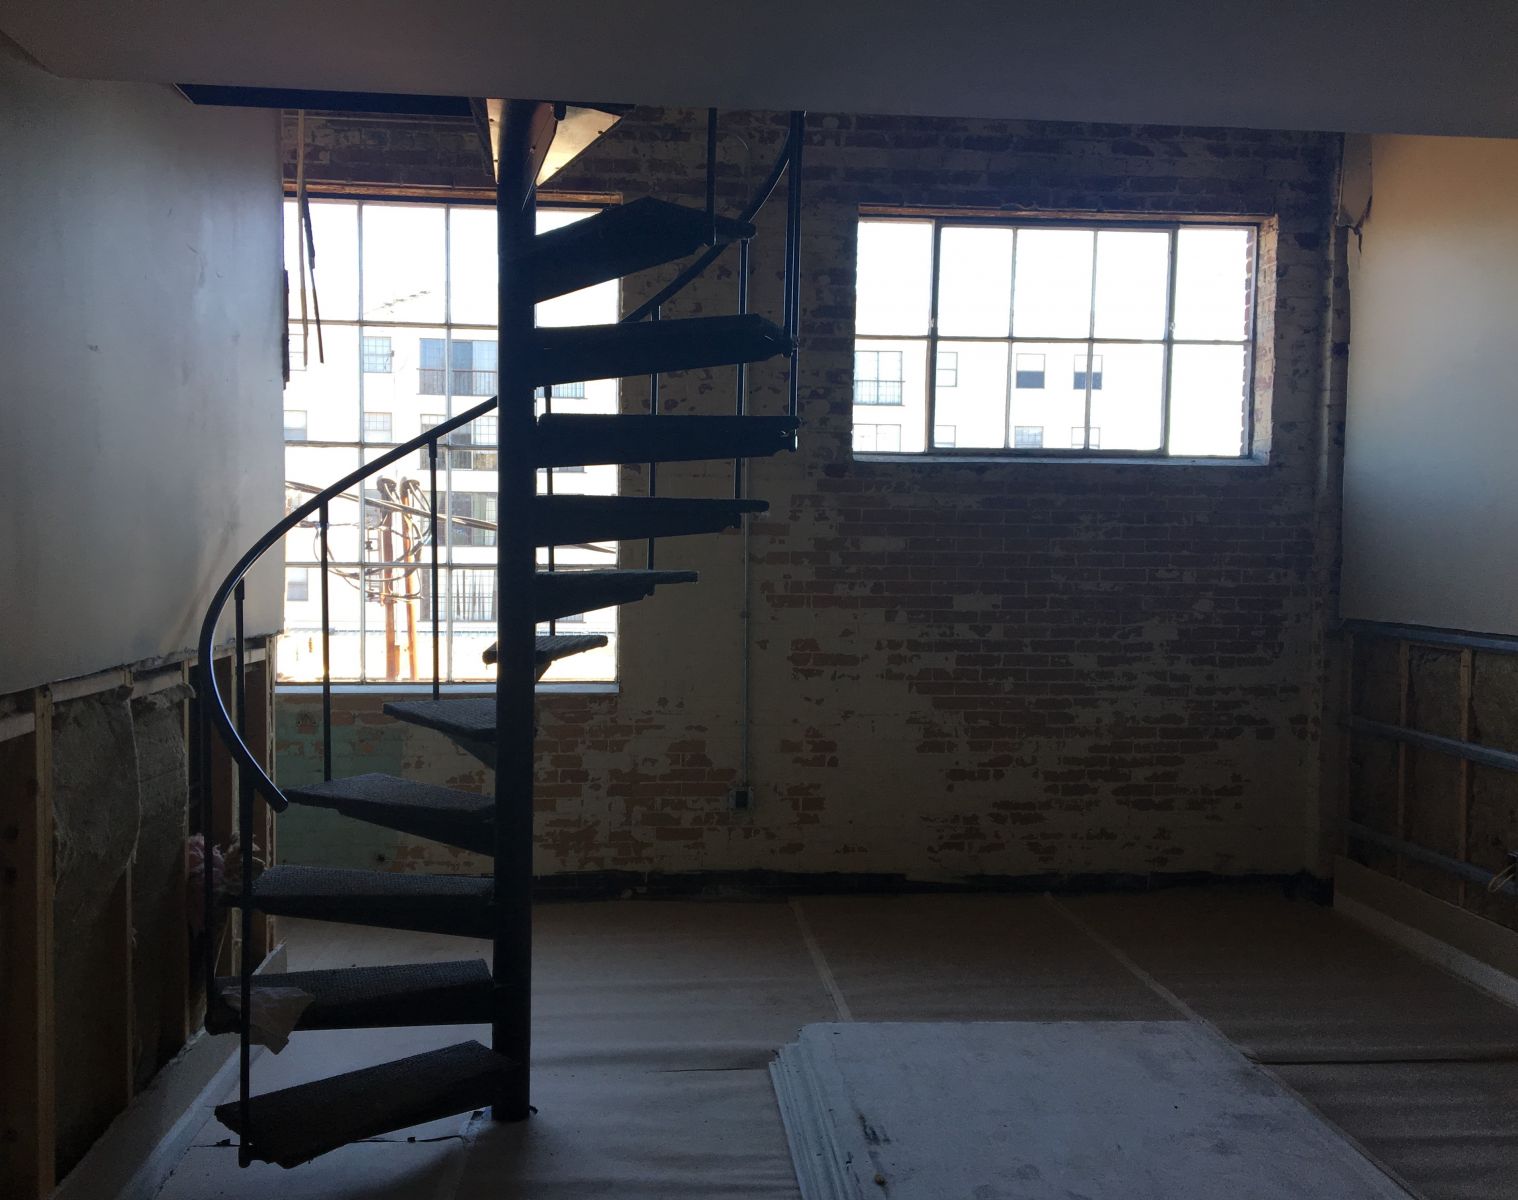 Eight upstairs lofts feature spiral staircases leading to a bedroom. All units are being outfitted with kitchenettes. (Photo/Melinda Waldrop)